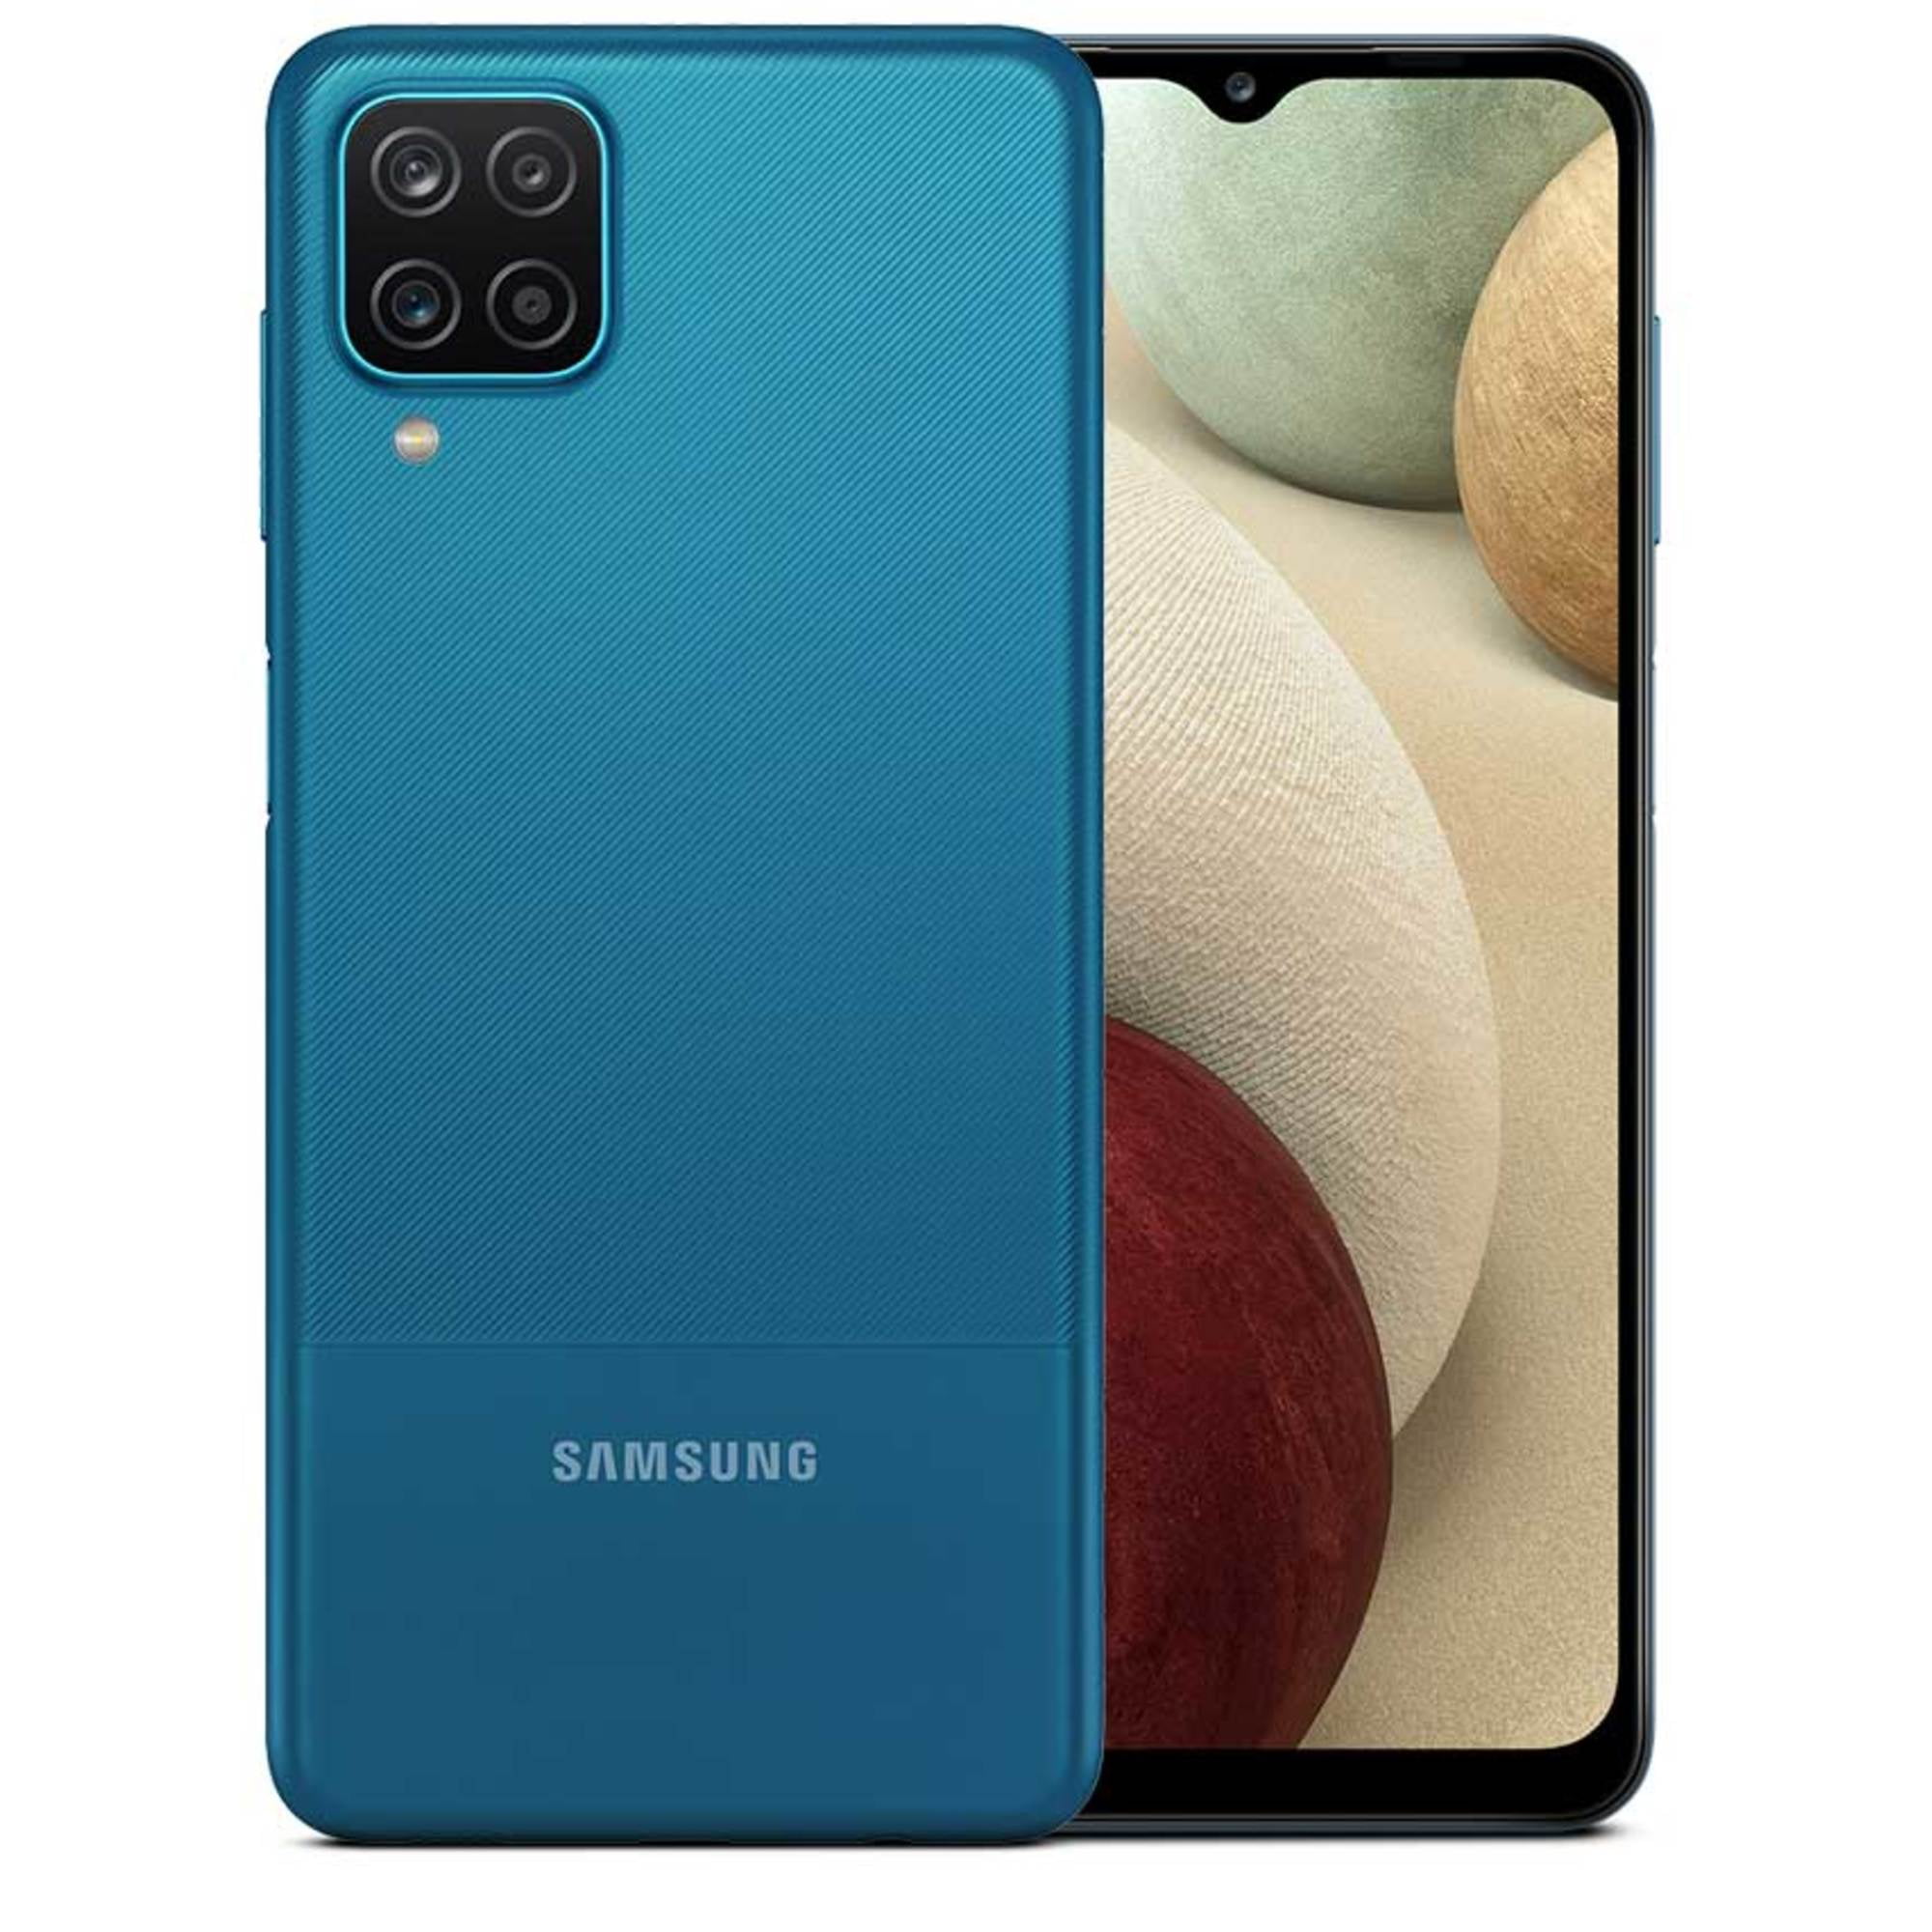 SAMSUNG Galaxy A12 A125M 64GB Dual GSM Unlocked Android Smart Phone (International Variant/US Compatible LTE) Blue - Walmart.com